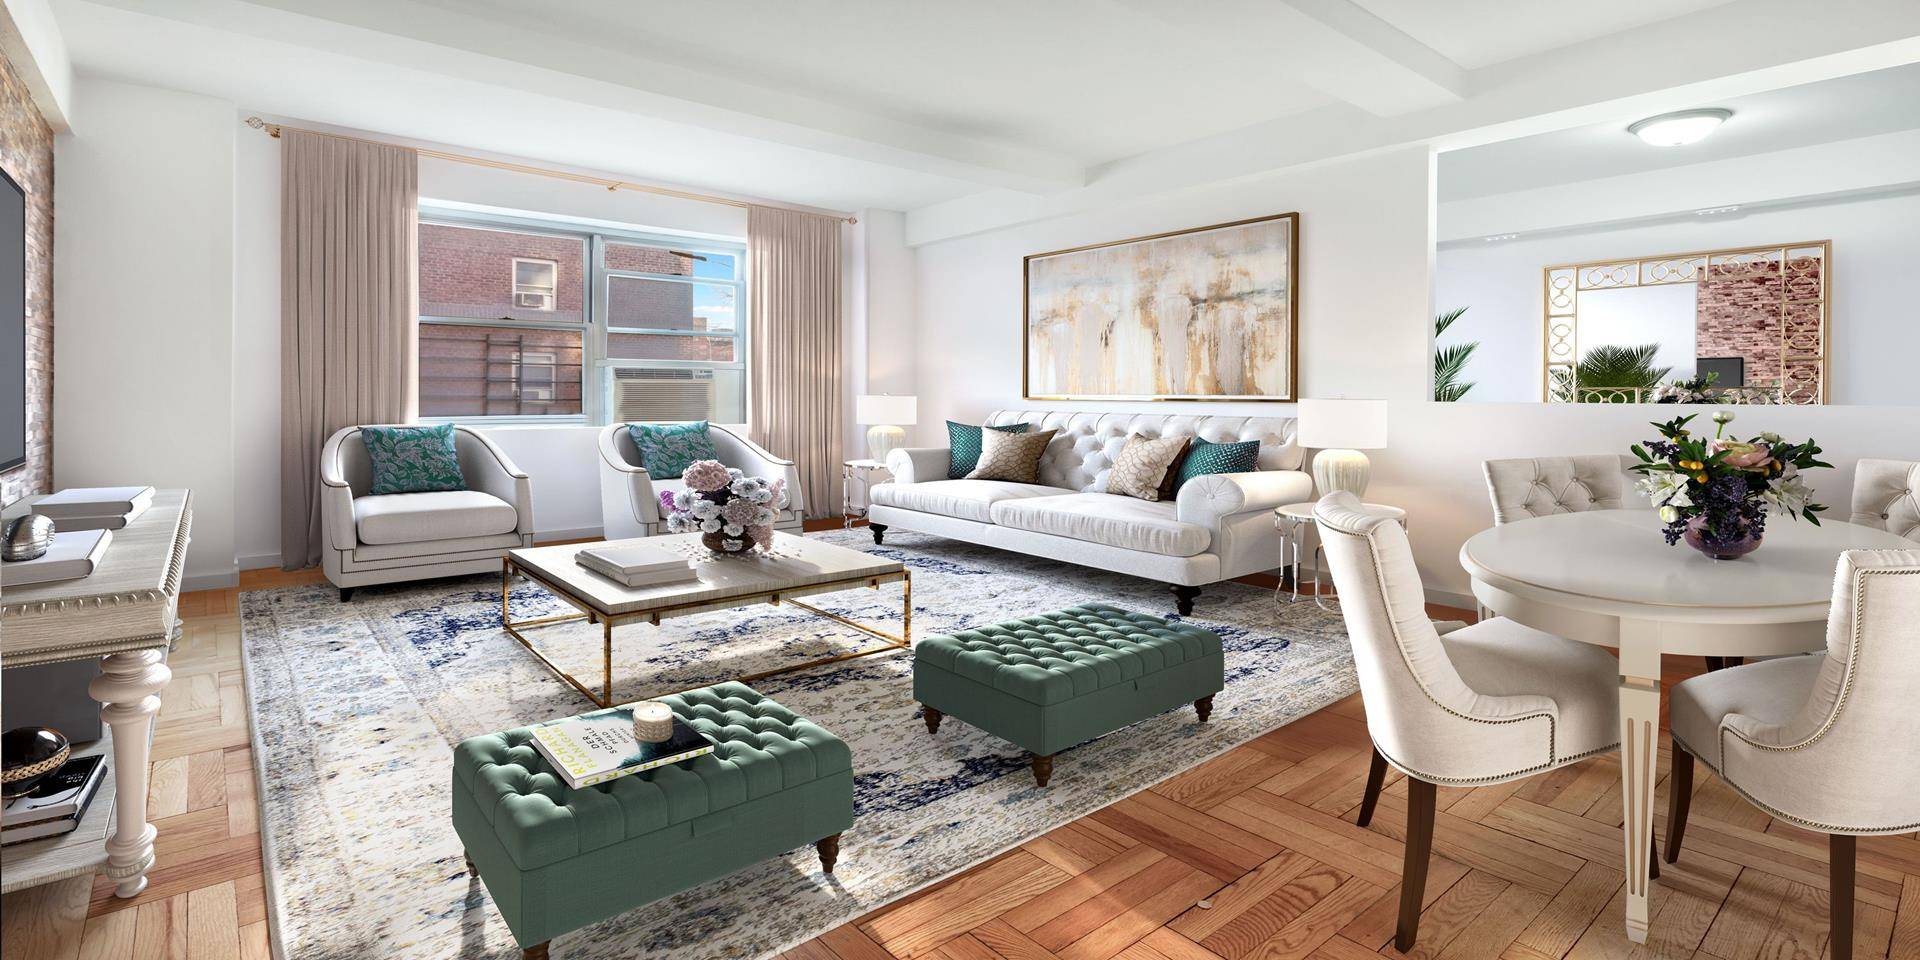 Perched on the second floor, this sprawling 1, 000sf 2BR home features dual southern and eastern exposure, flooding the apartment with light.